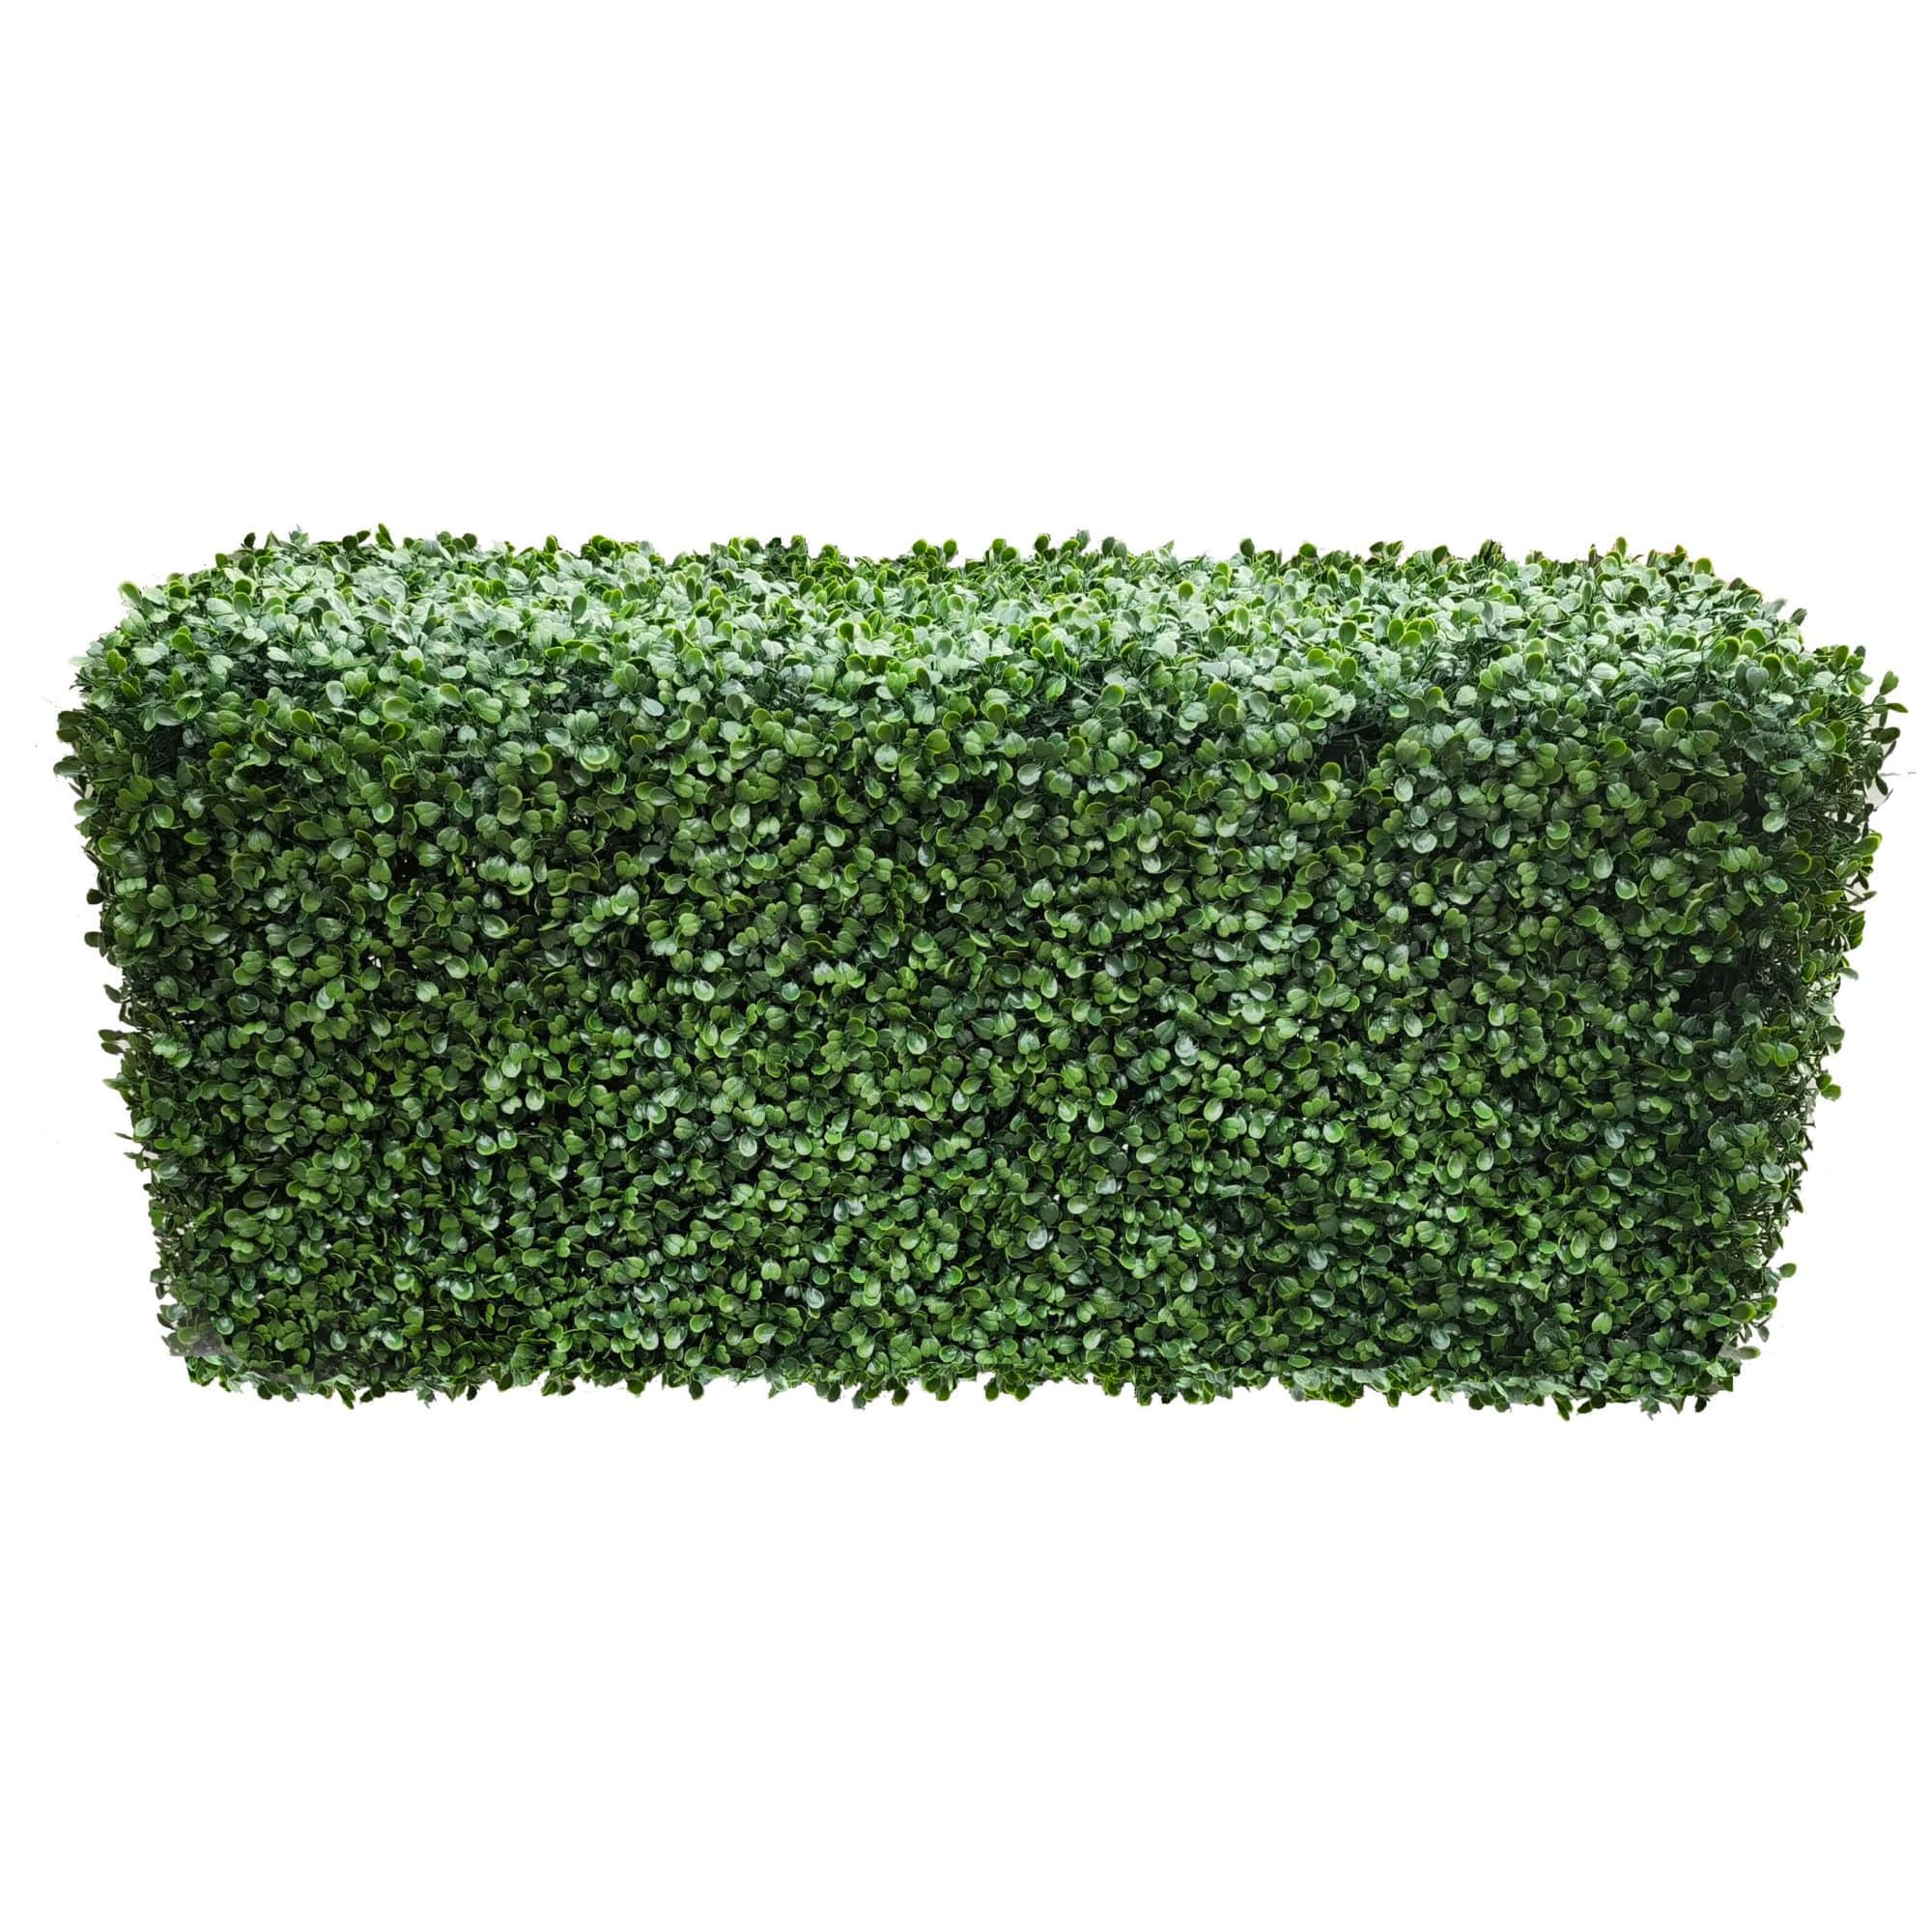 Artificial Boxwood Hedges Outdoor Proof